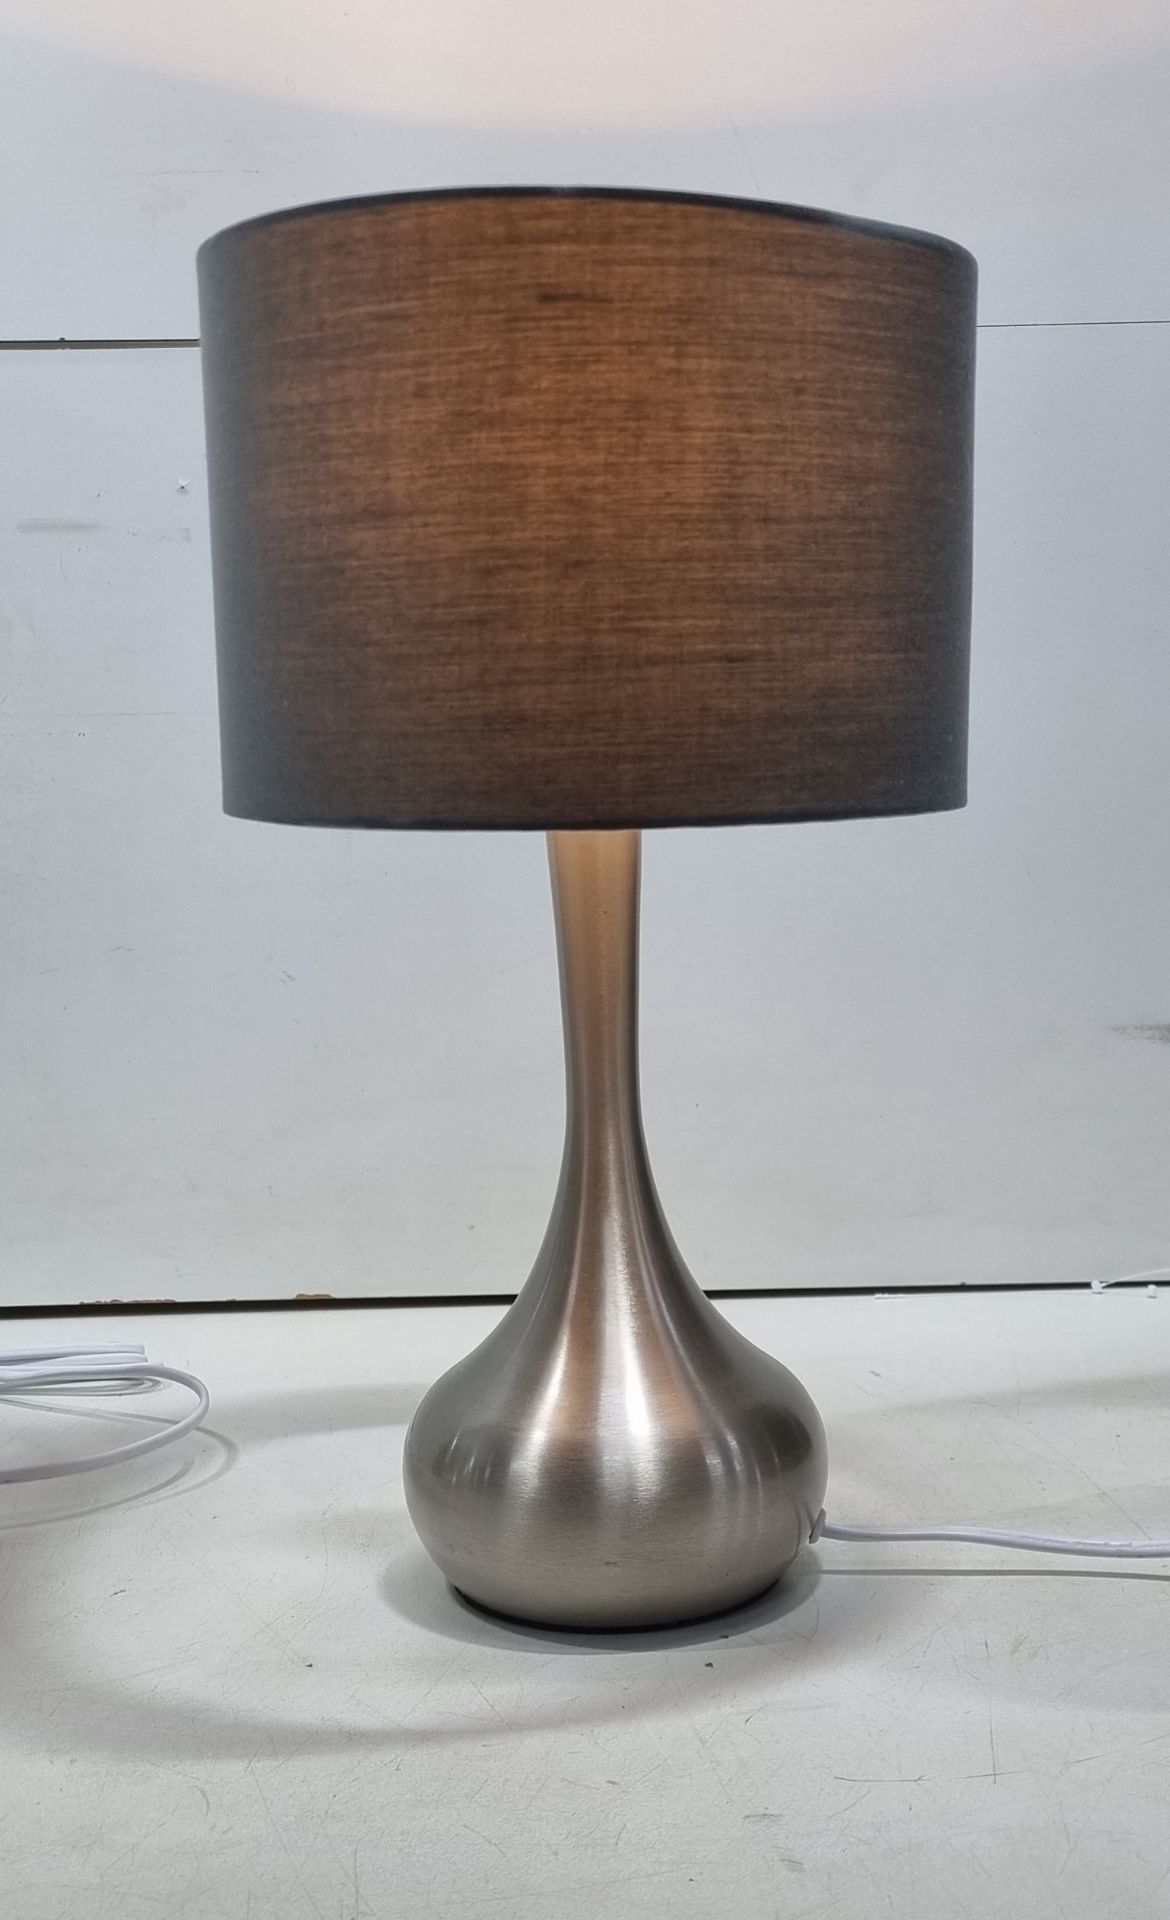 Pair of Bedside Lamps w/ Grey Shades/Chrome Base - Image 2 of 3